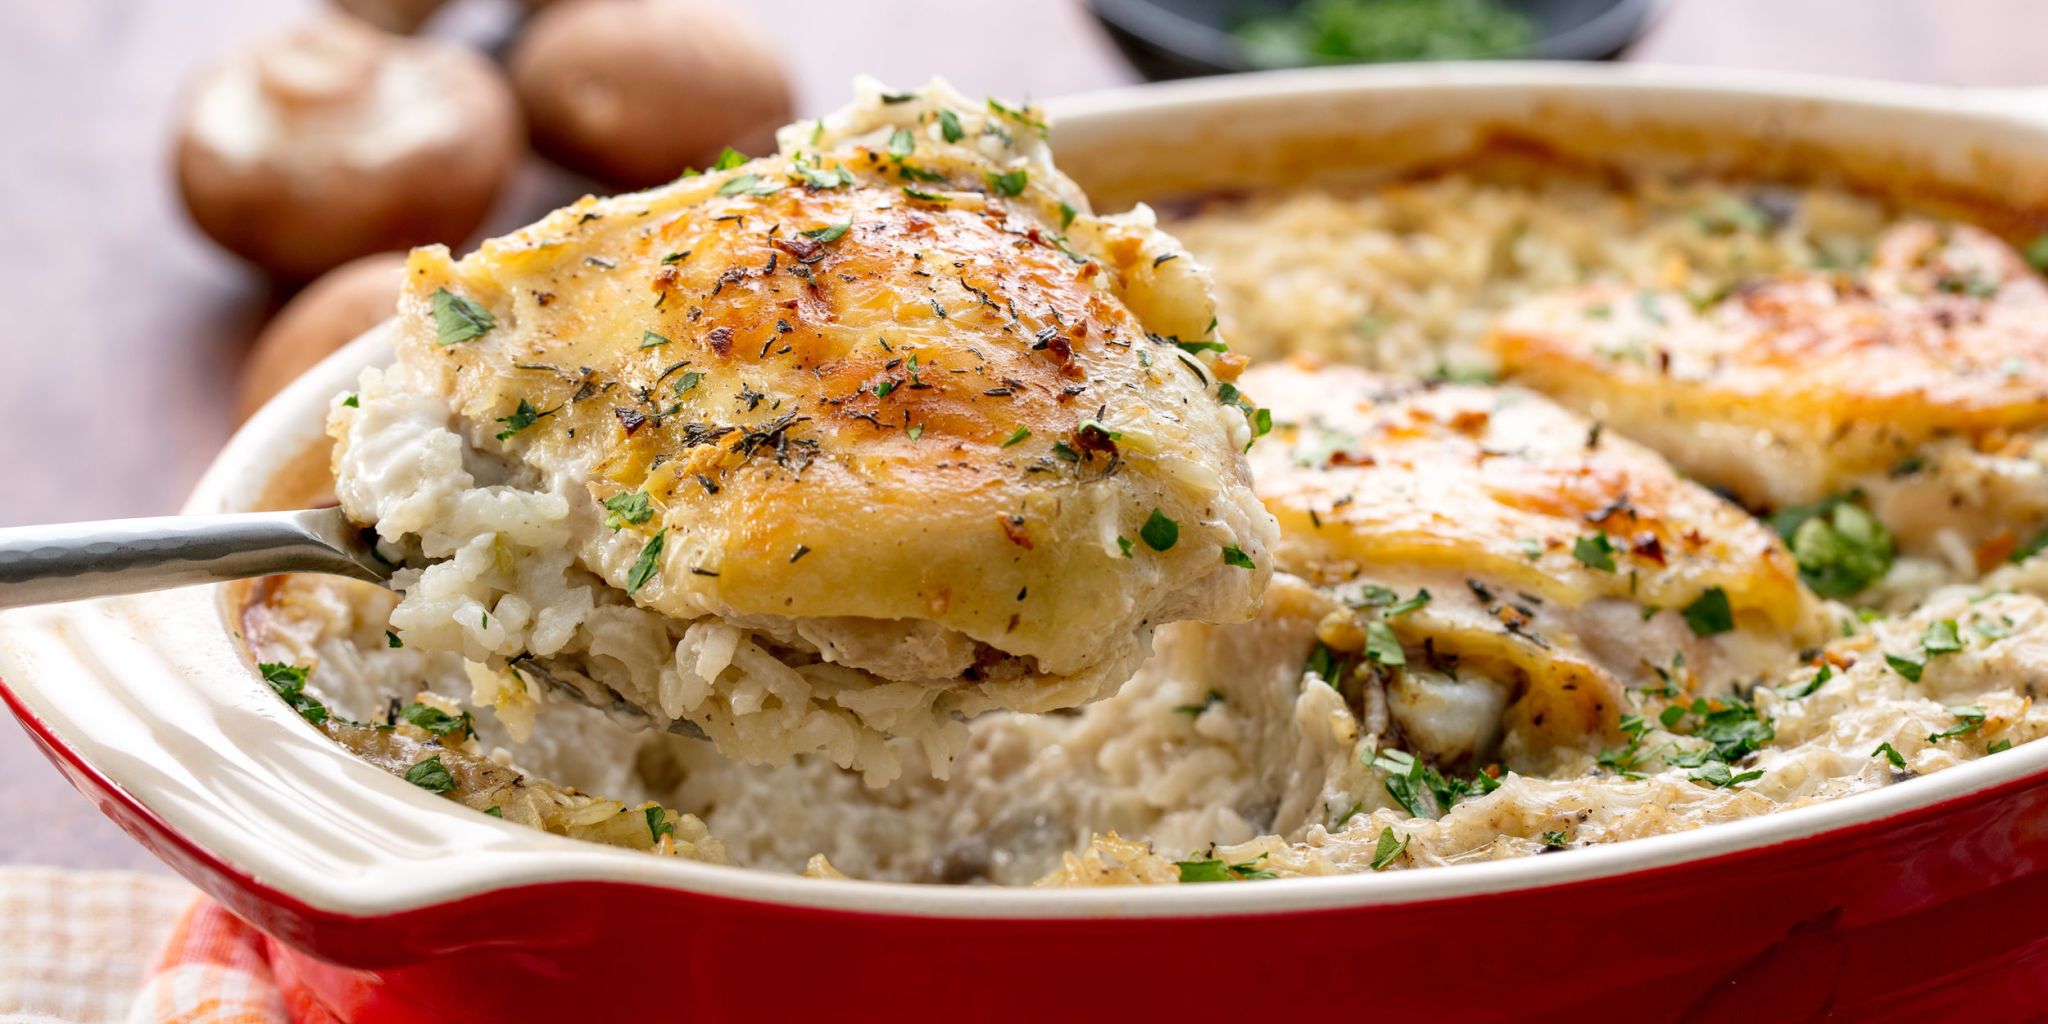 Campbell soup chicken and rice casserole recipe ...